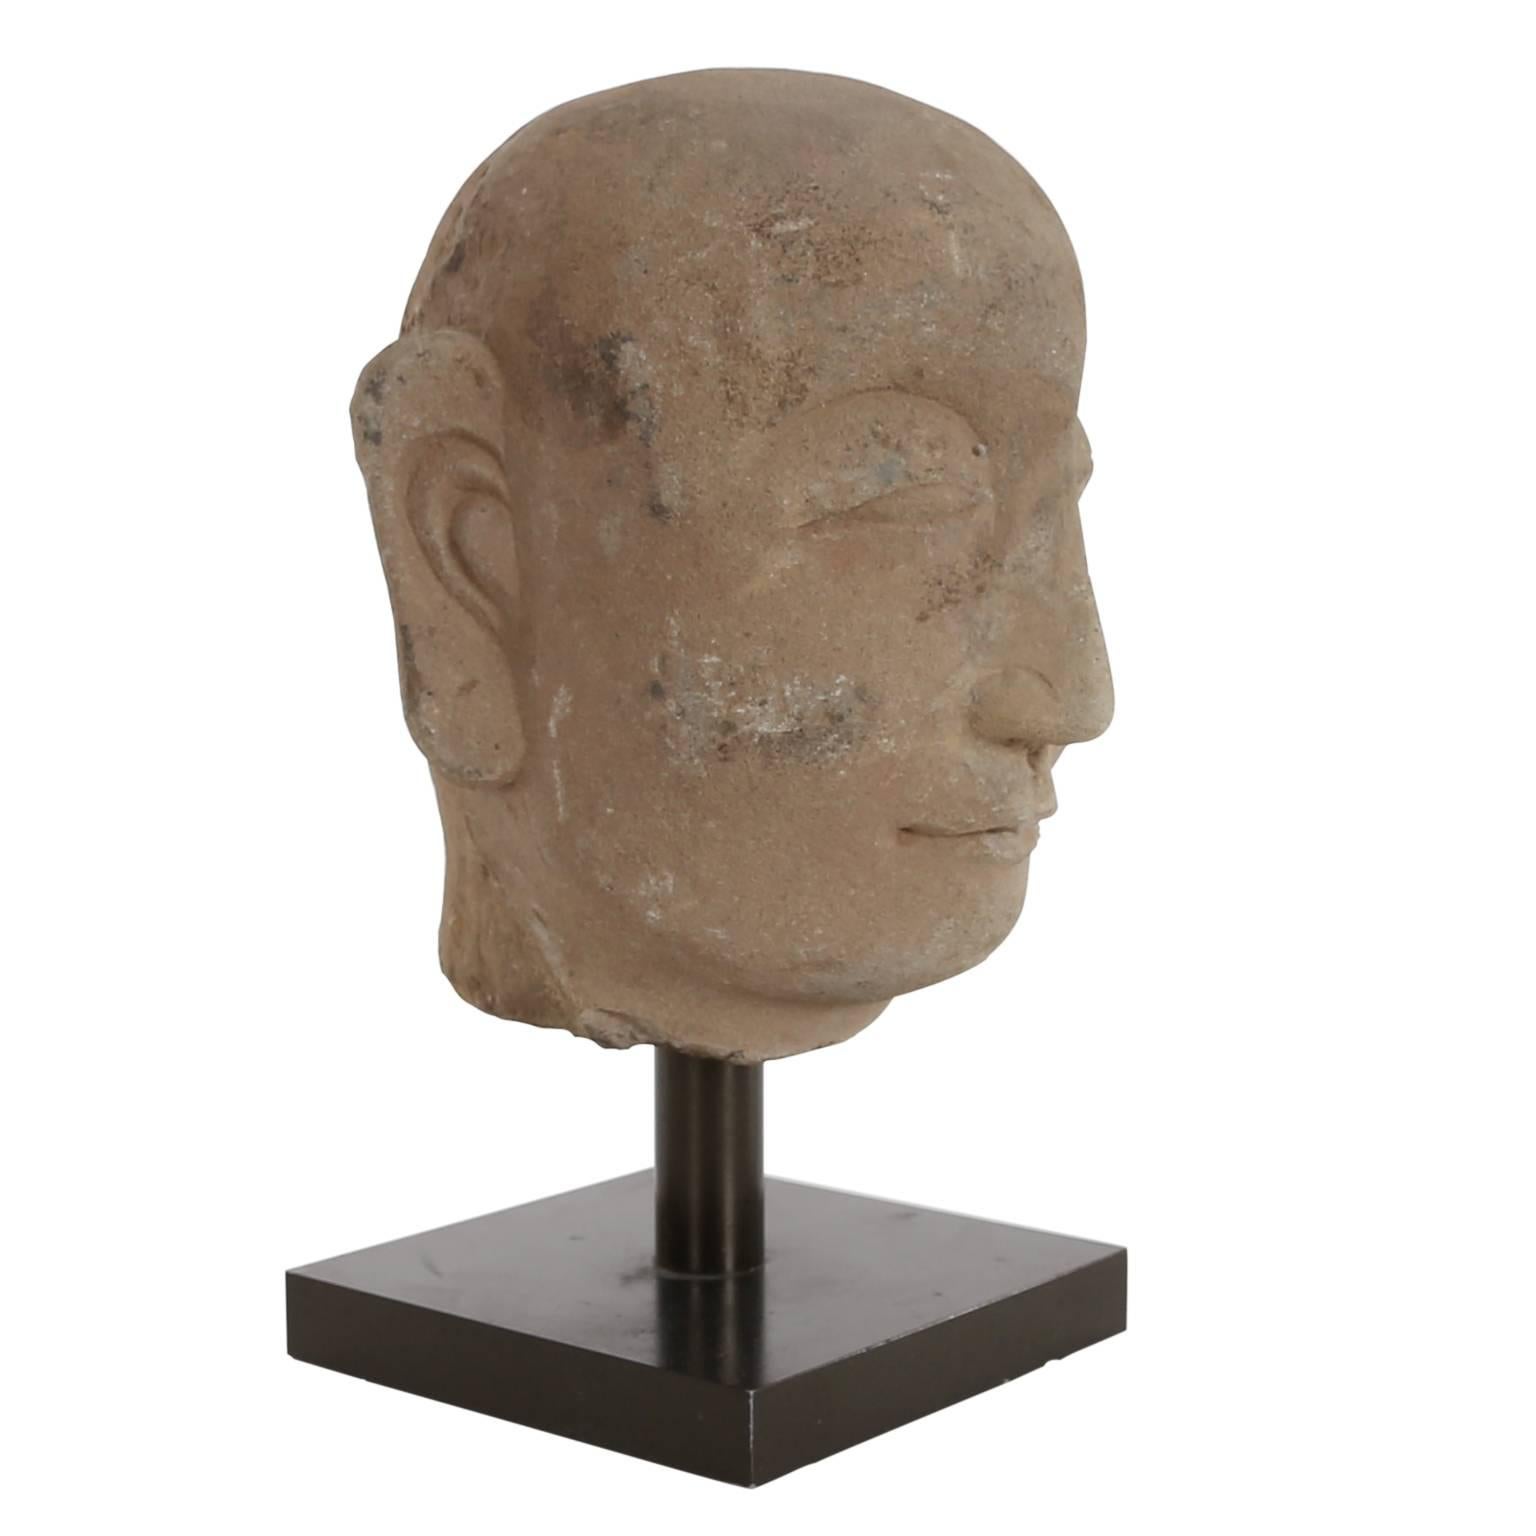 A Chinese carved stone head, with stylized features and a serene expression, Qing dynasty, on a modern stand.
Provenance: The collection of the Late John Walden (1925-2013).
 